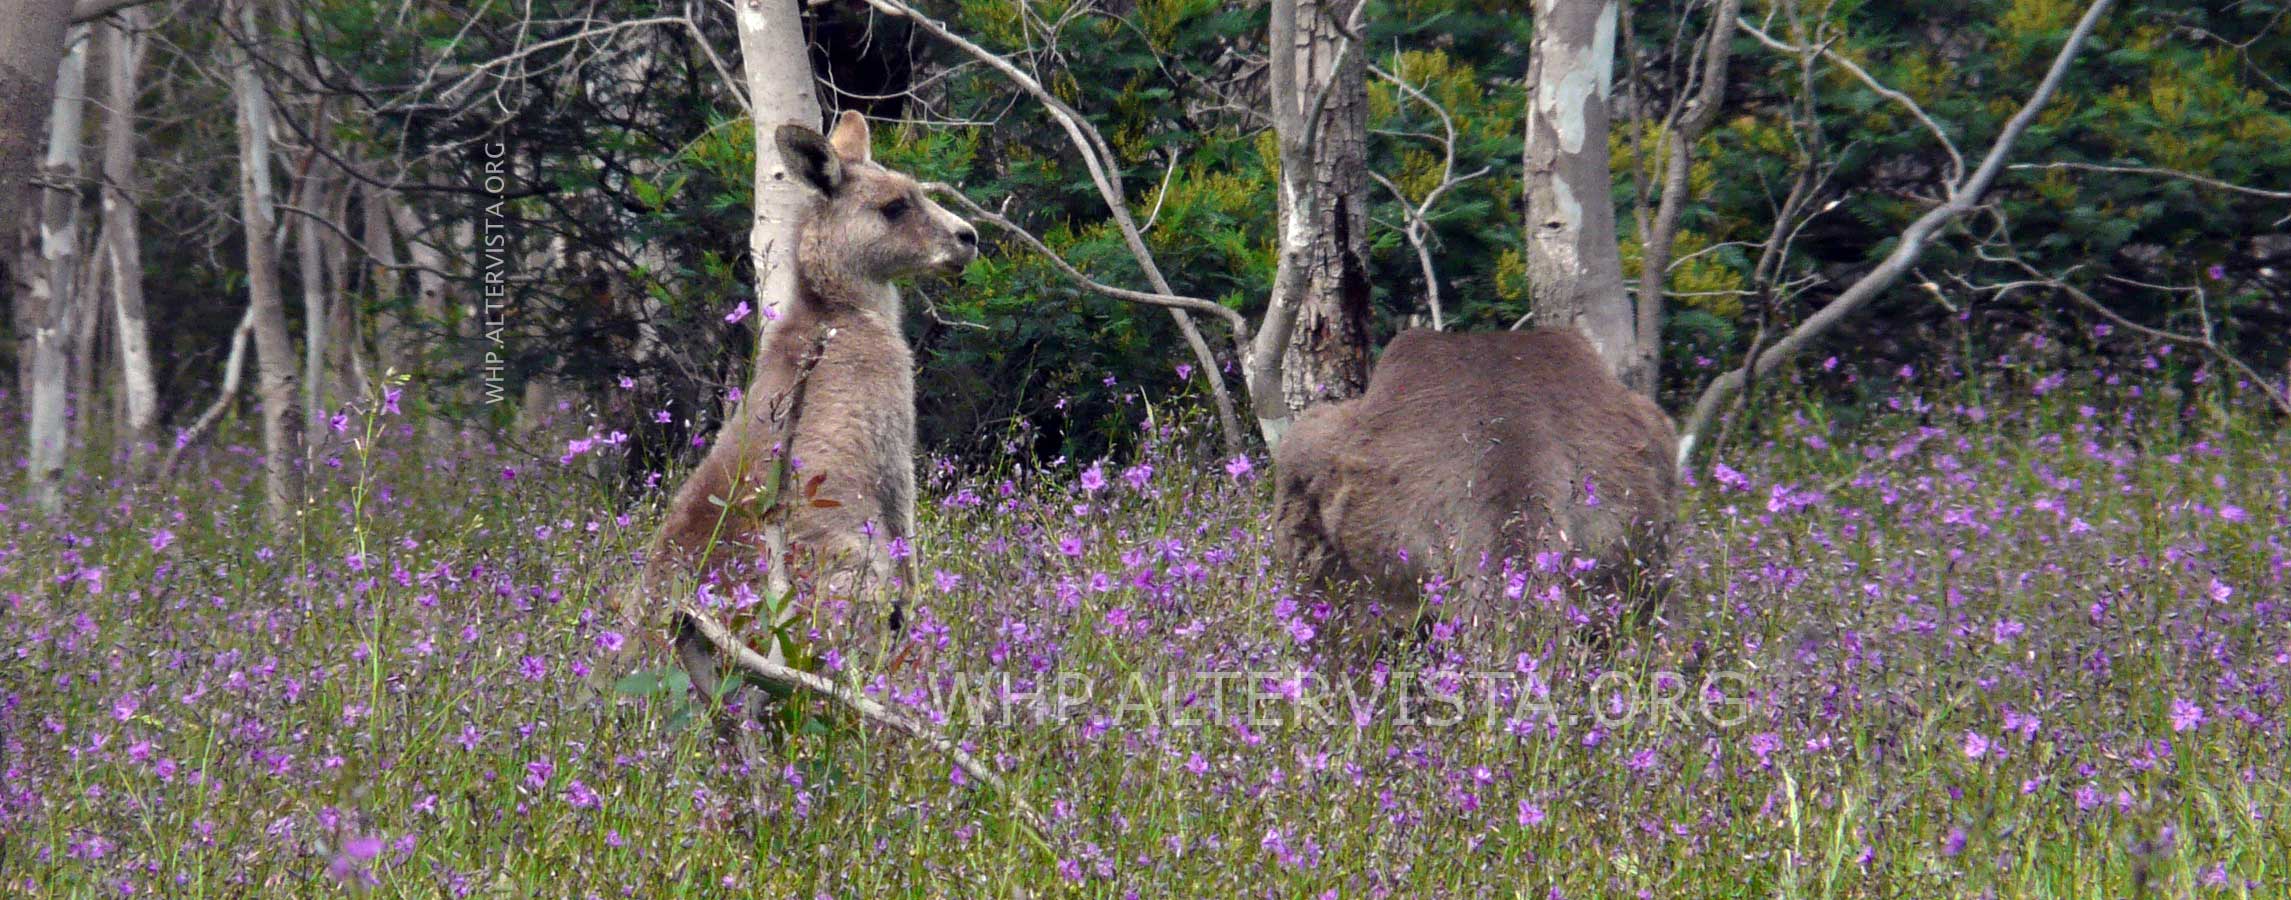 Kangaroos in a patch of Chocolate Lilies on the former Greenvale Sanatorium Land in Woodlands Historic Park